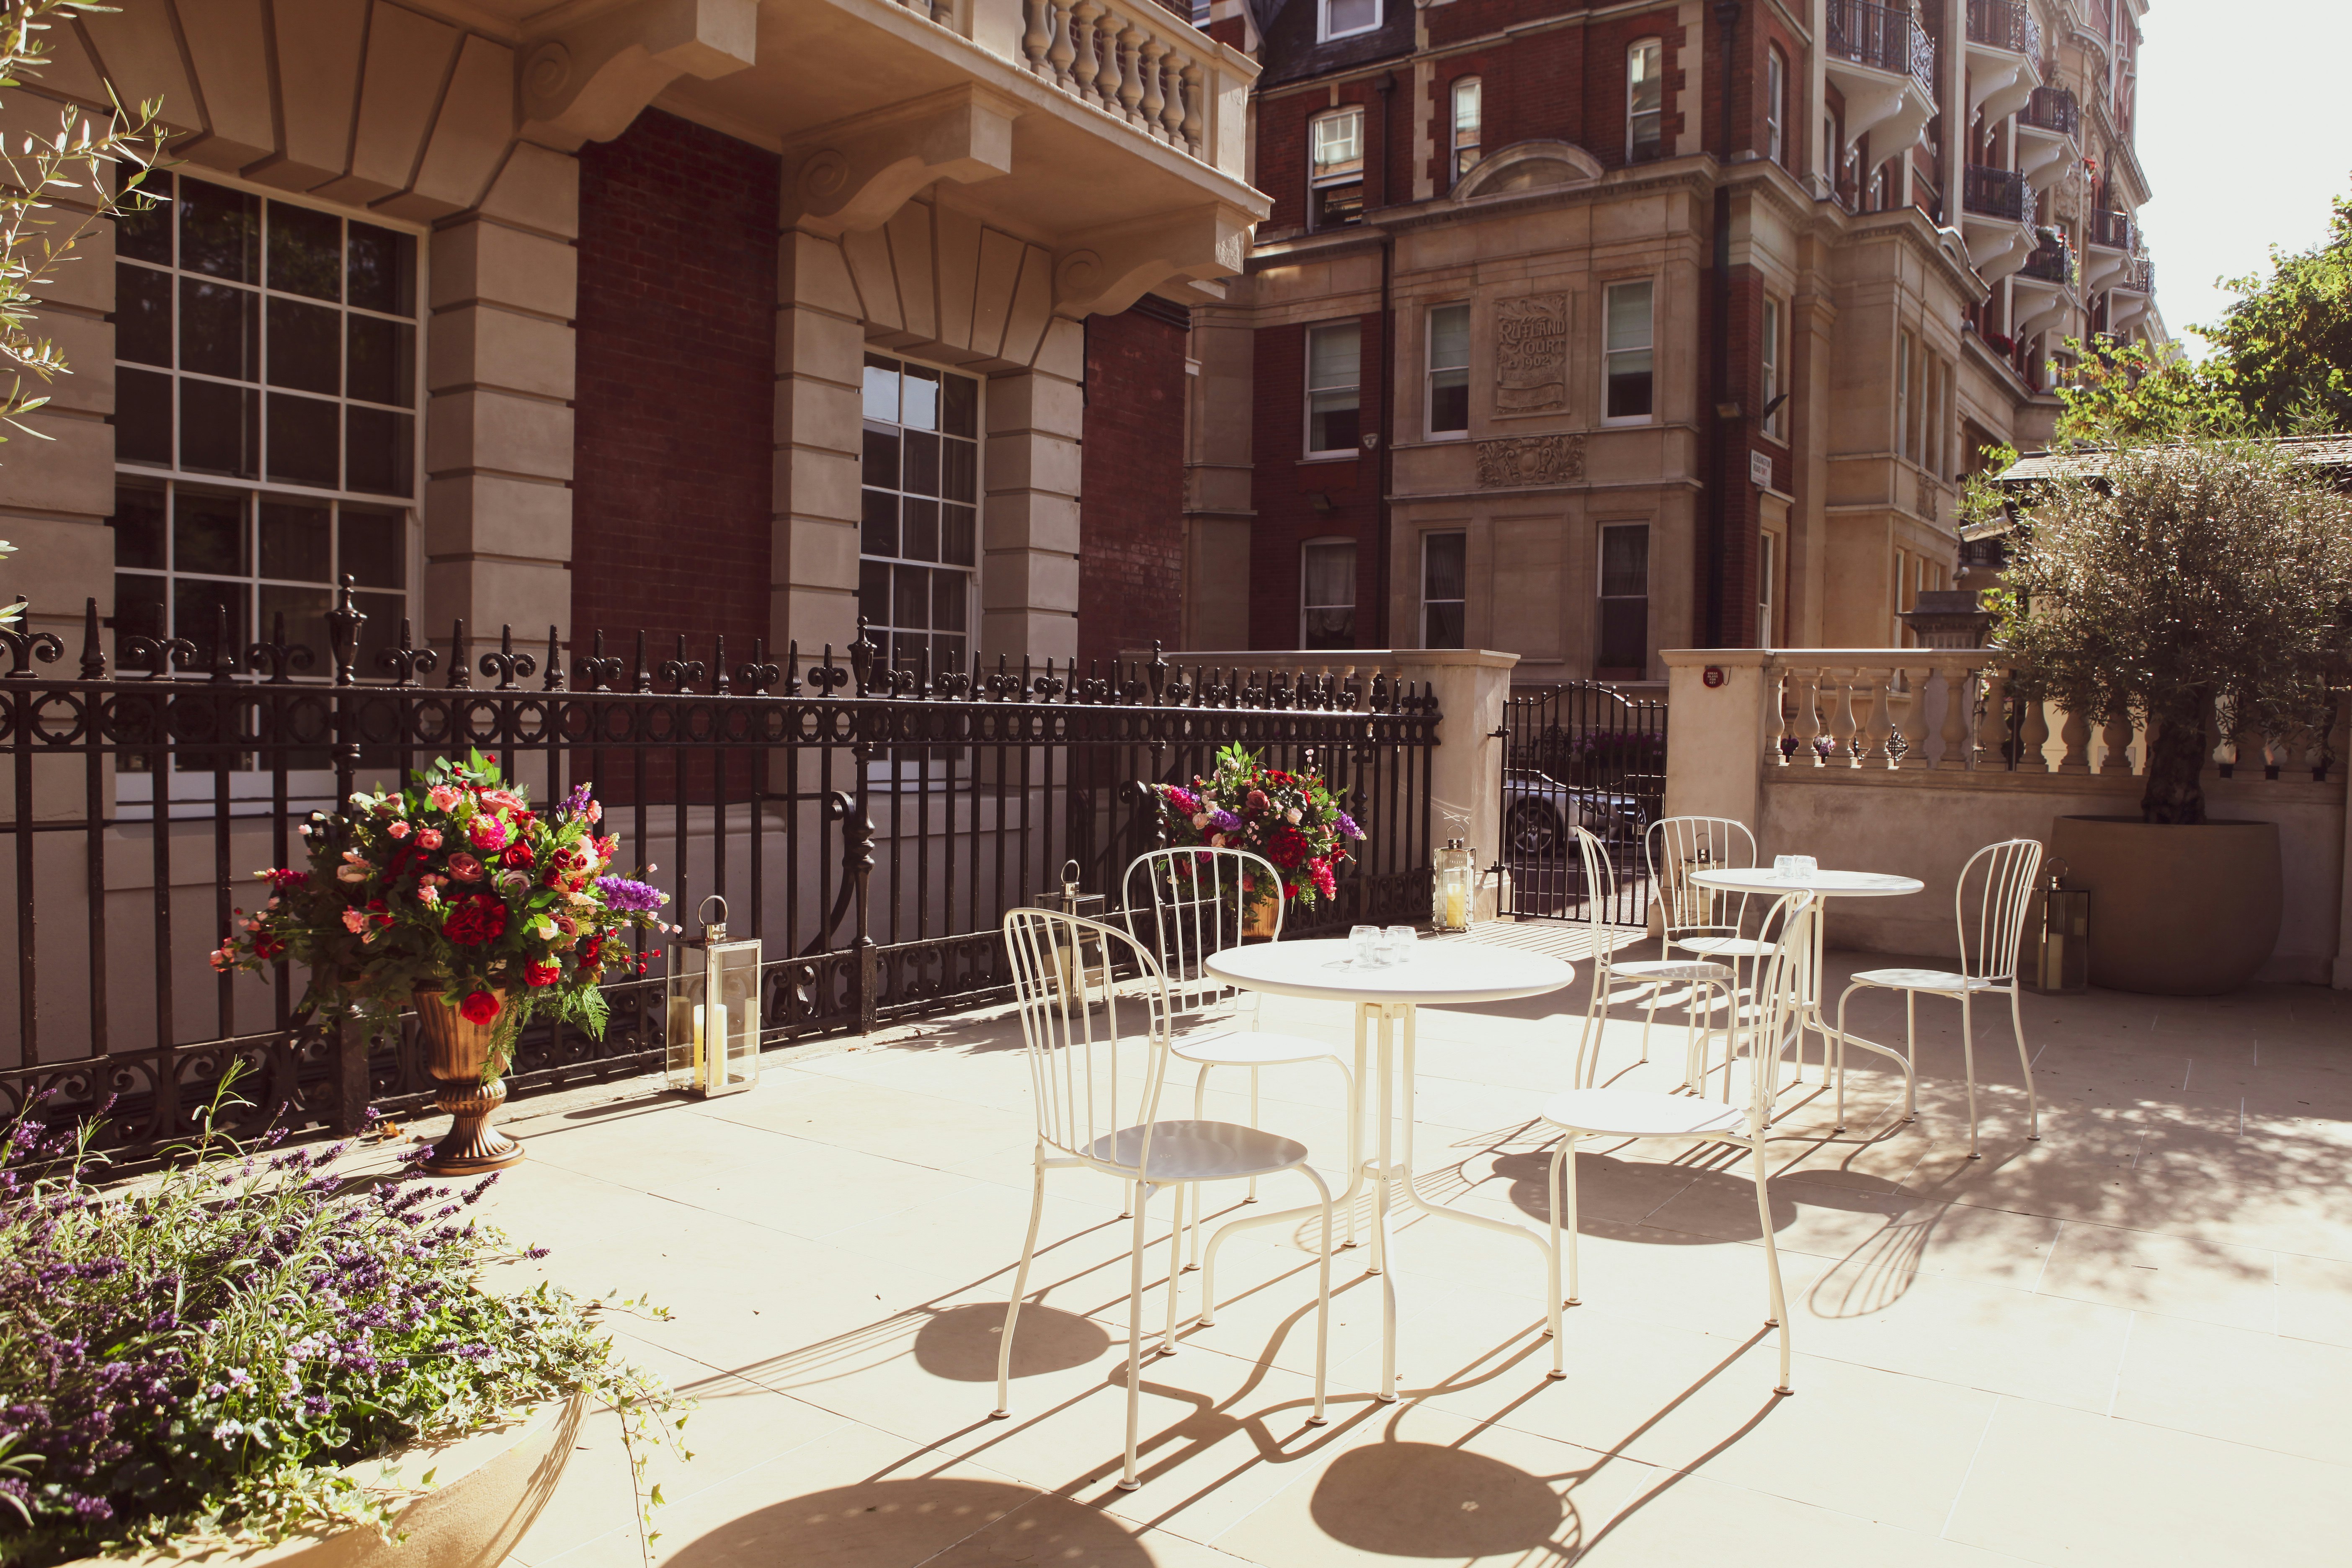 Private Party Venues in West End - Kent House Knightsbridge